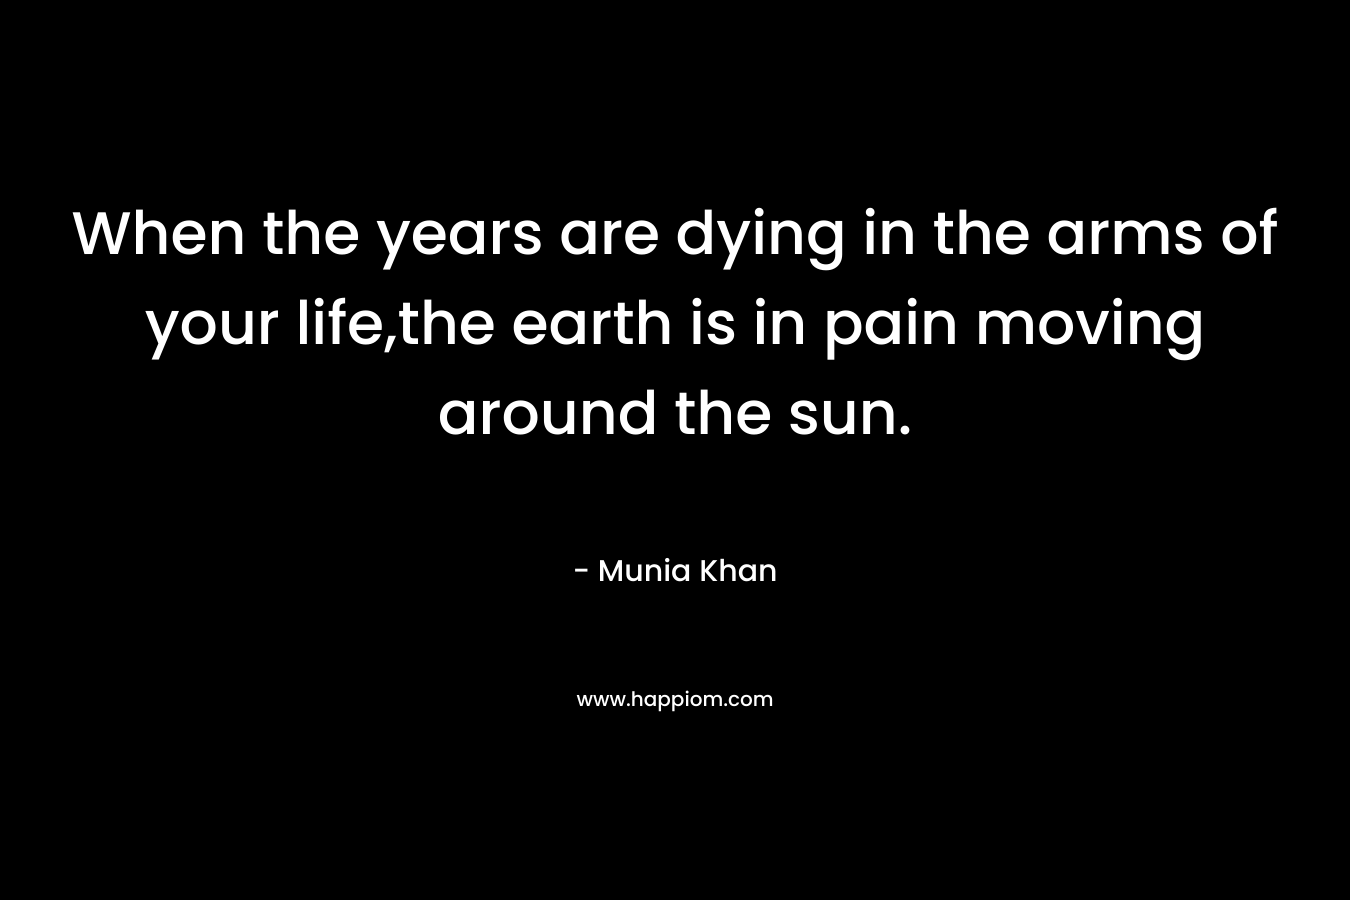 When the years are dying in the arms of your life,the earth is in pain moving around the sun. – Munia Khan